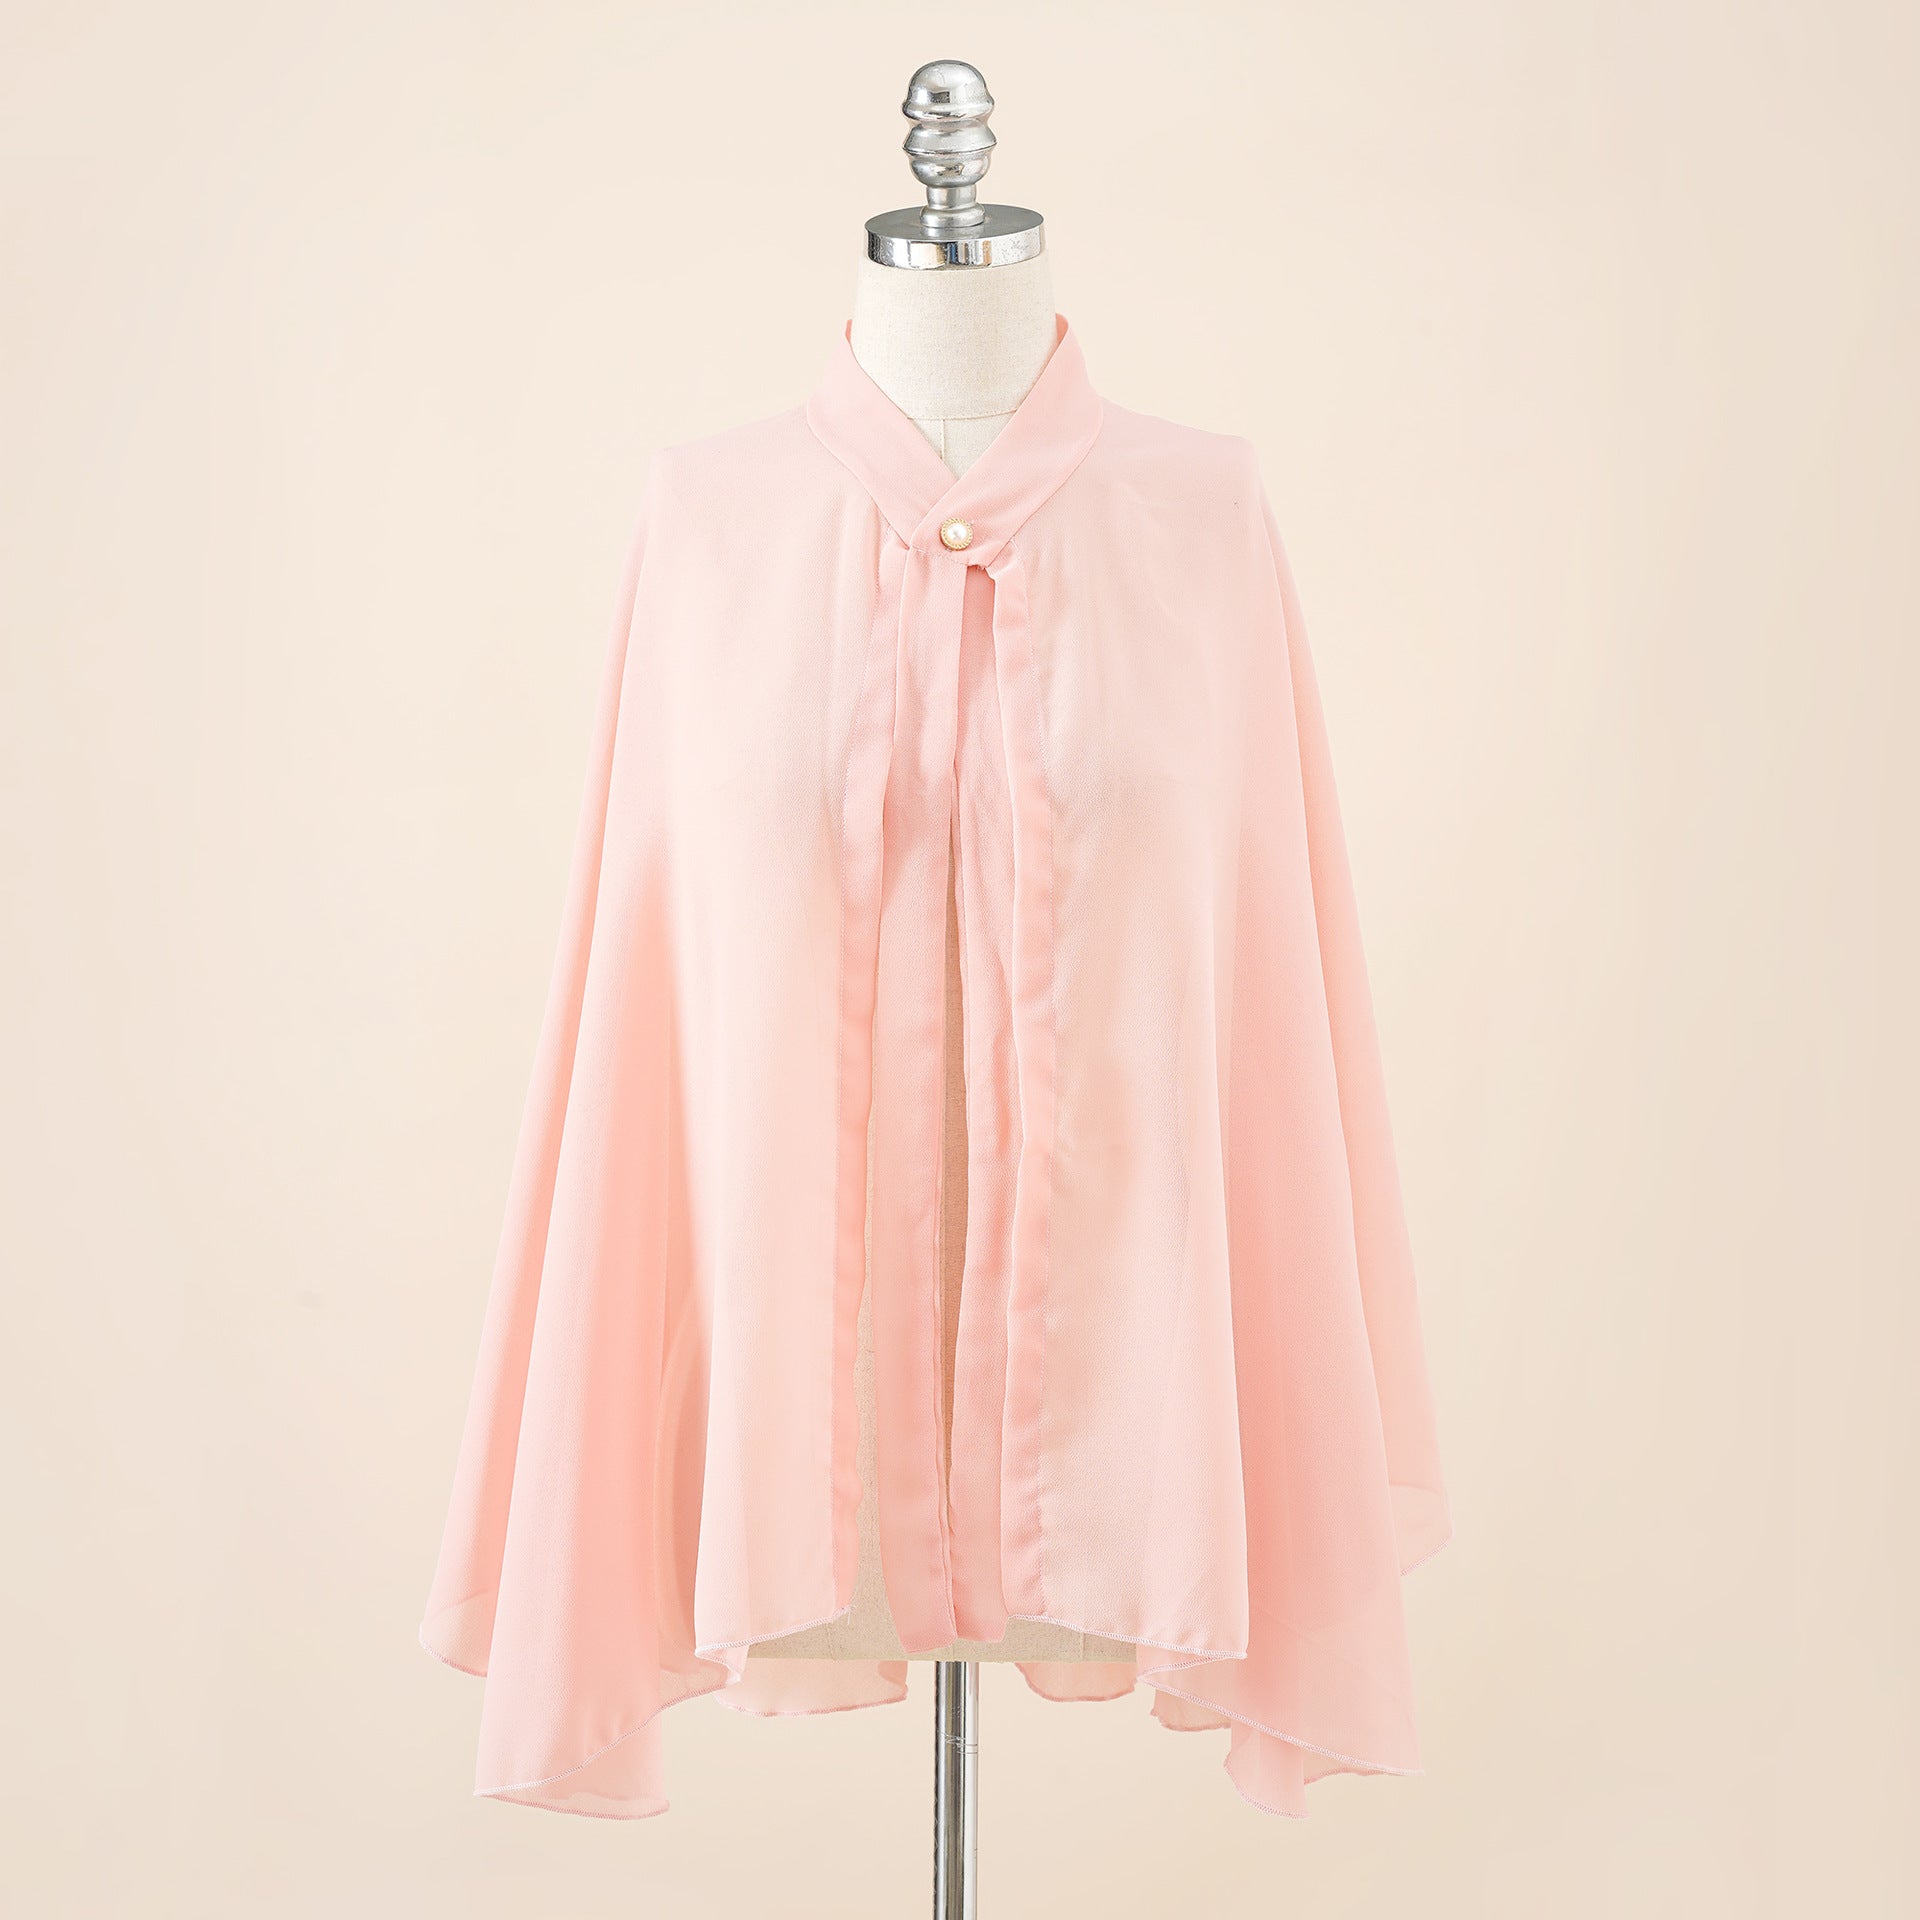 Solid Color Chiffon Button Cardigan Overclothes Outdoor Sunshade Cycling Sunscreen Shawl Beach Scarf